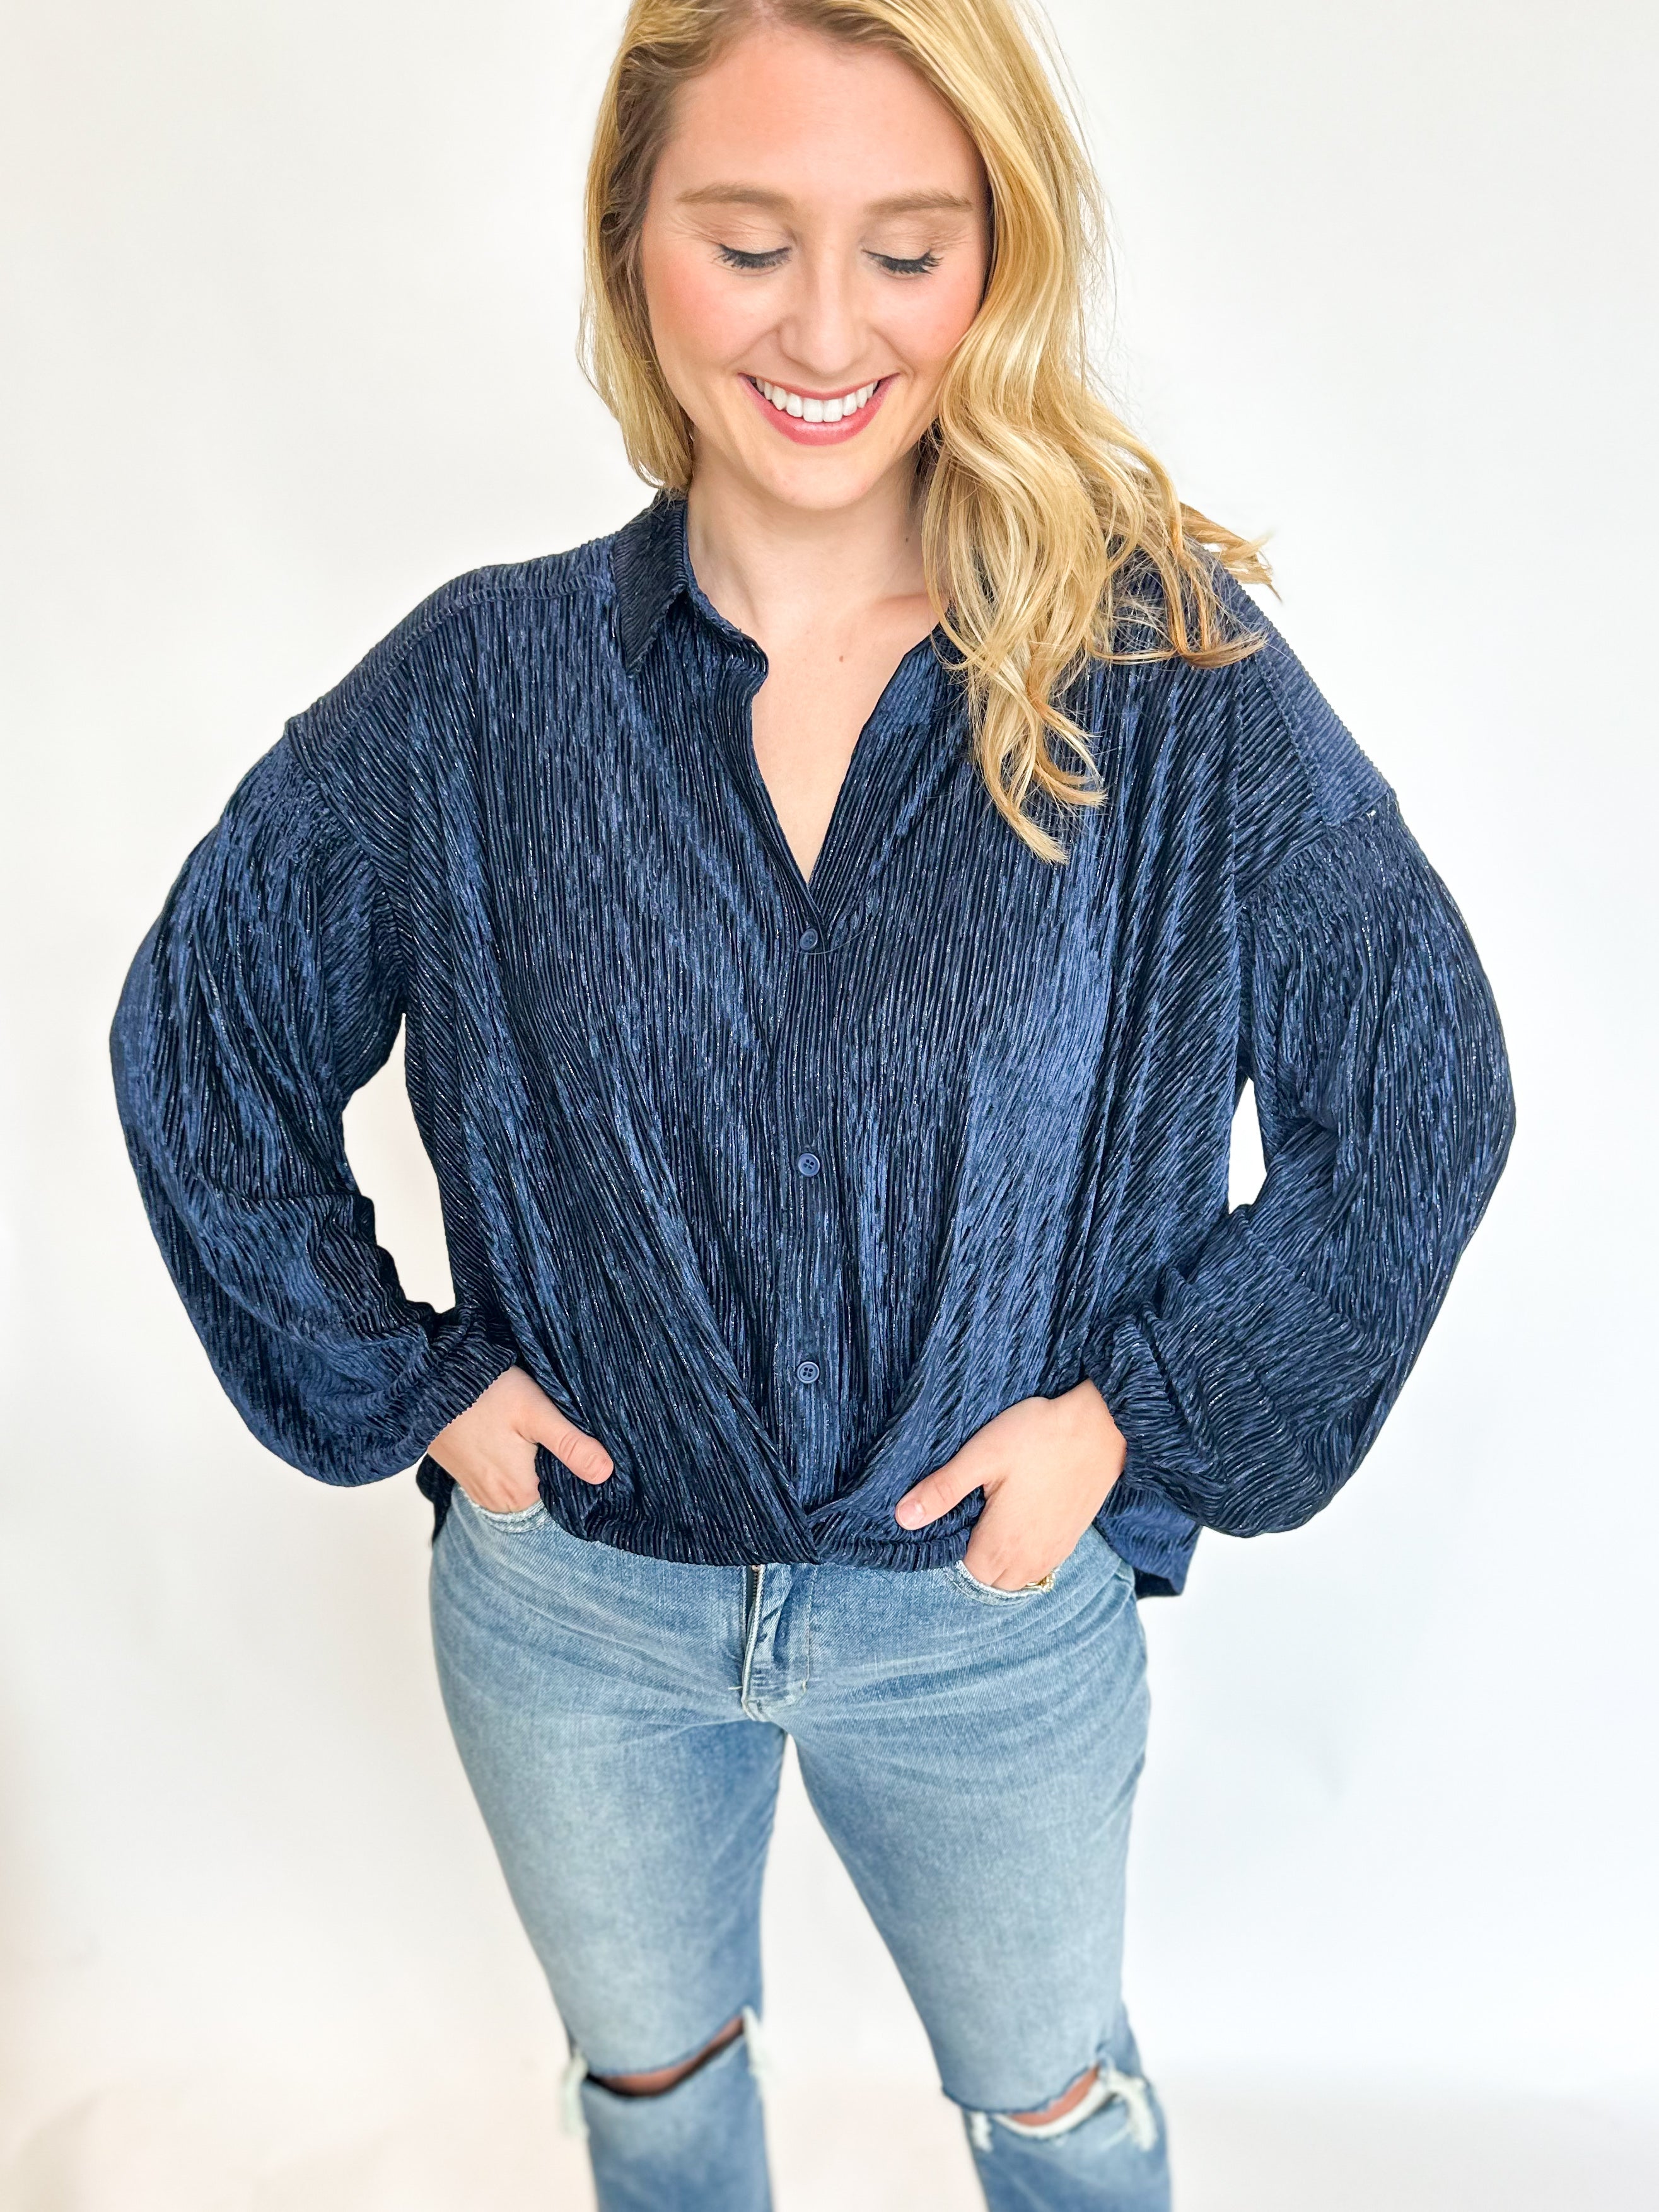 Textured Velvet Blouse - Navy-200 Fashion Blouses-SKIES ARE BLUE-July & June Women's Fashion Boutique Located in San Antonio, Texas